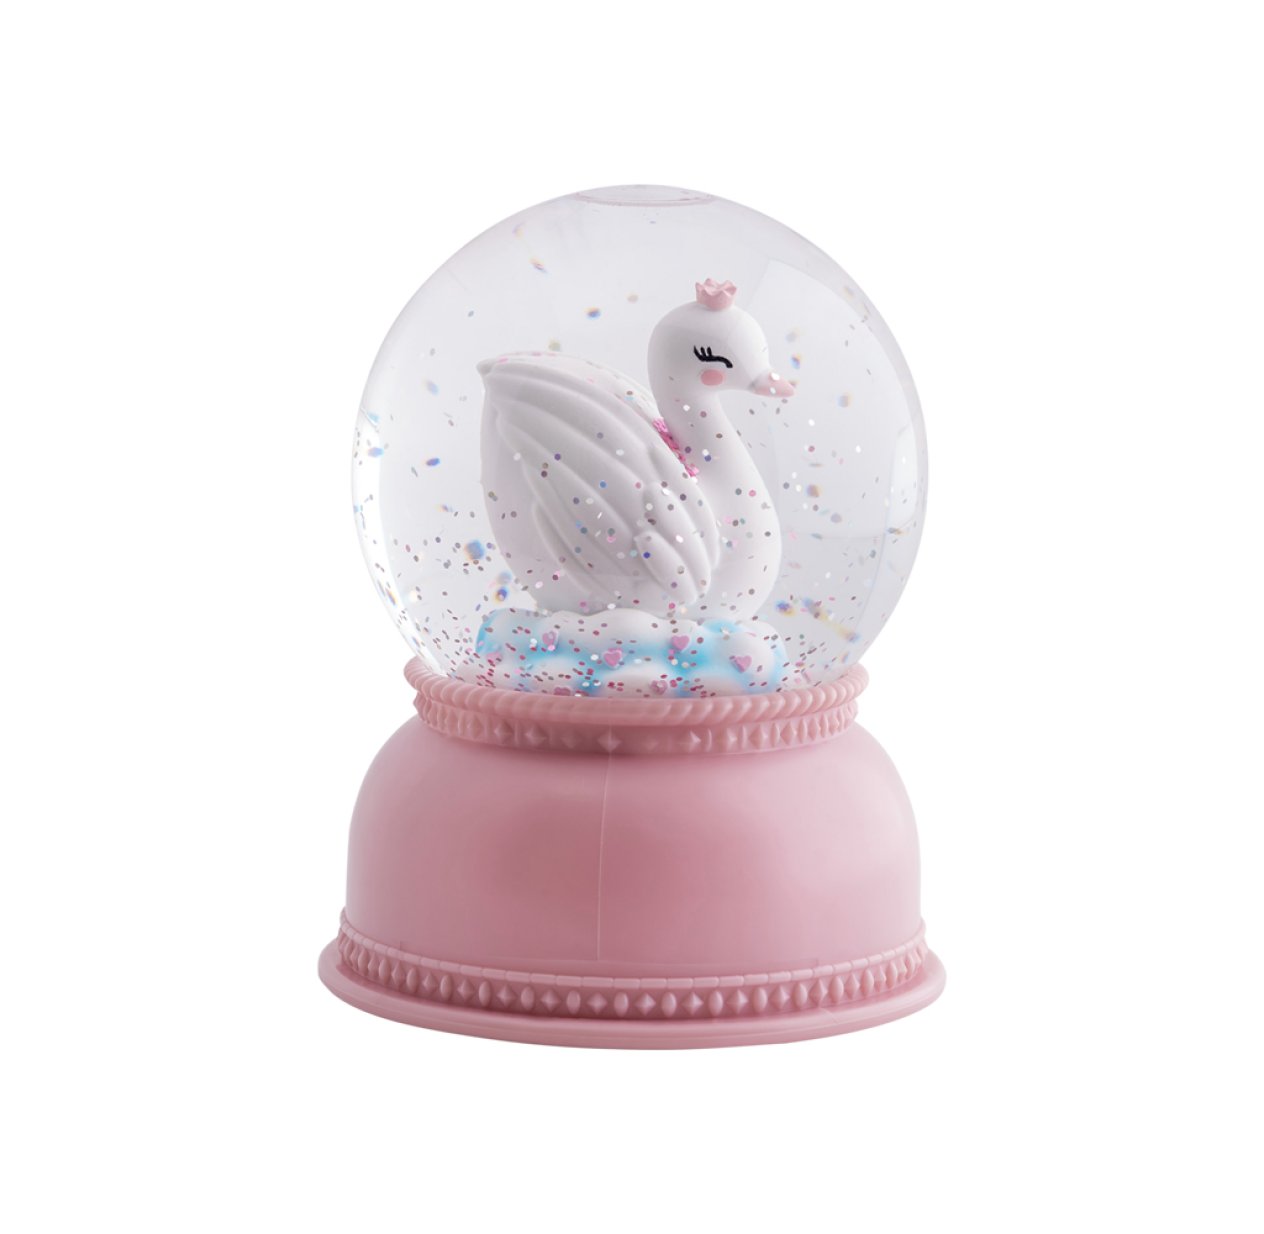 Veilleuse Nuage Rose Pastel A Little Lovely Company - Les Bambetises